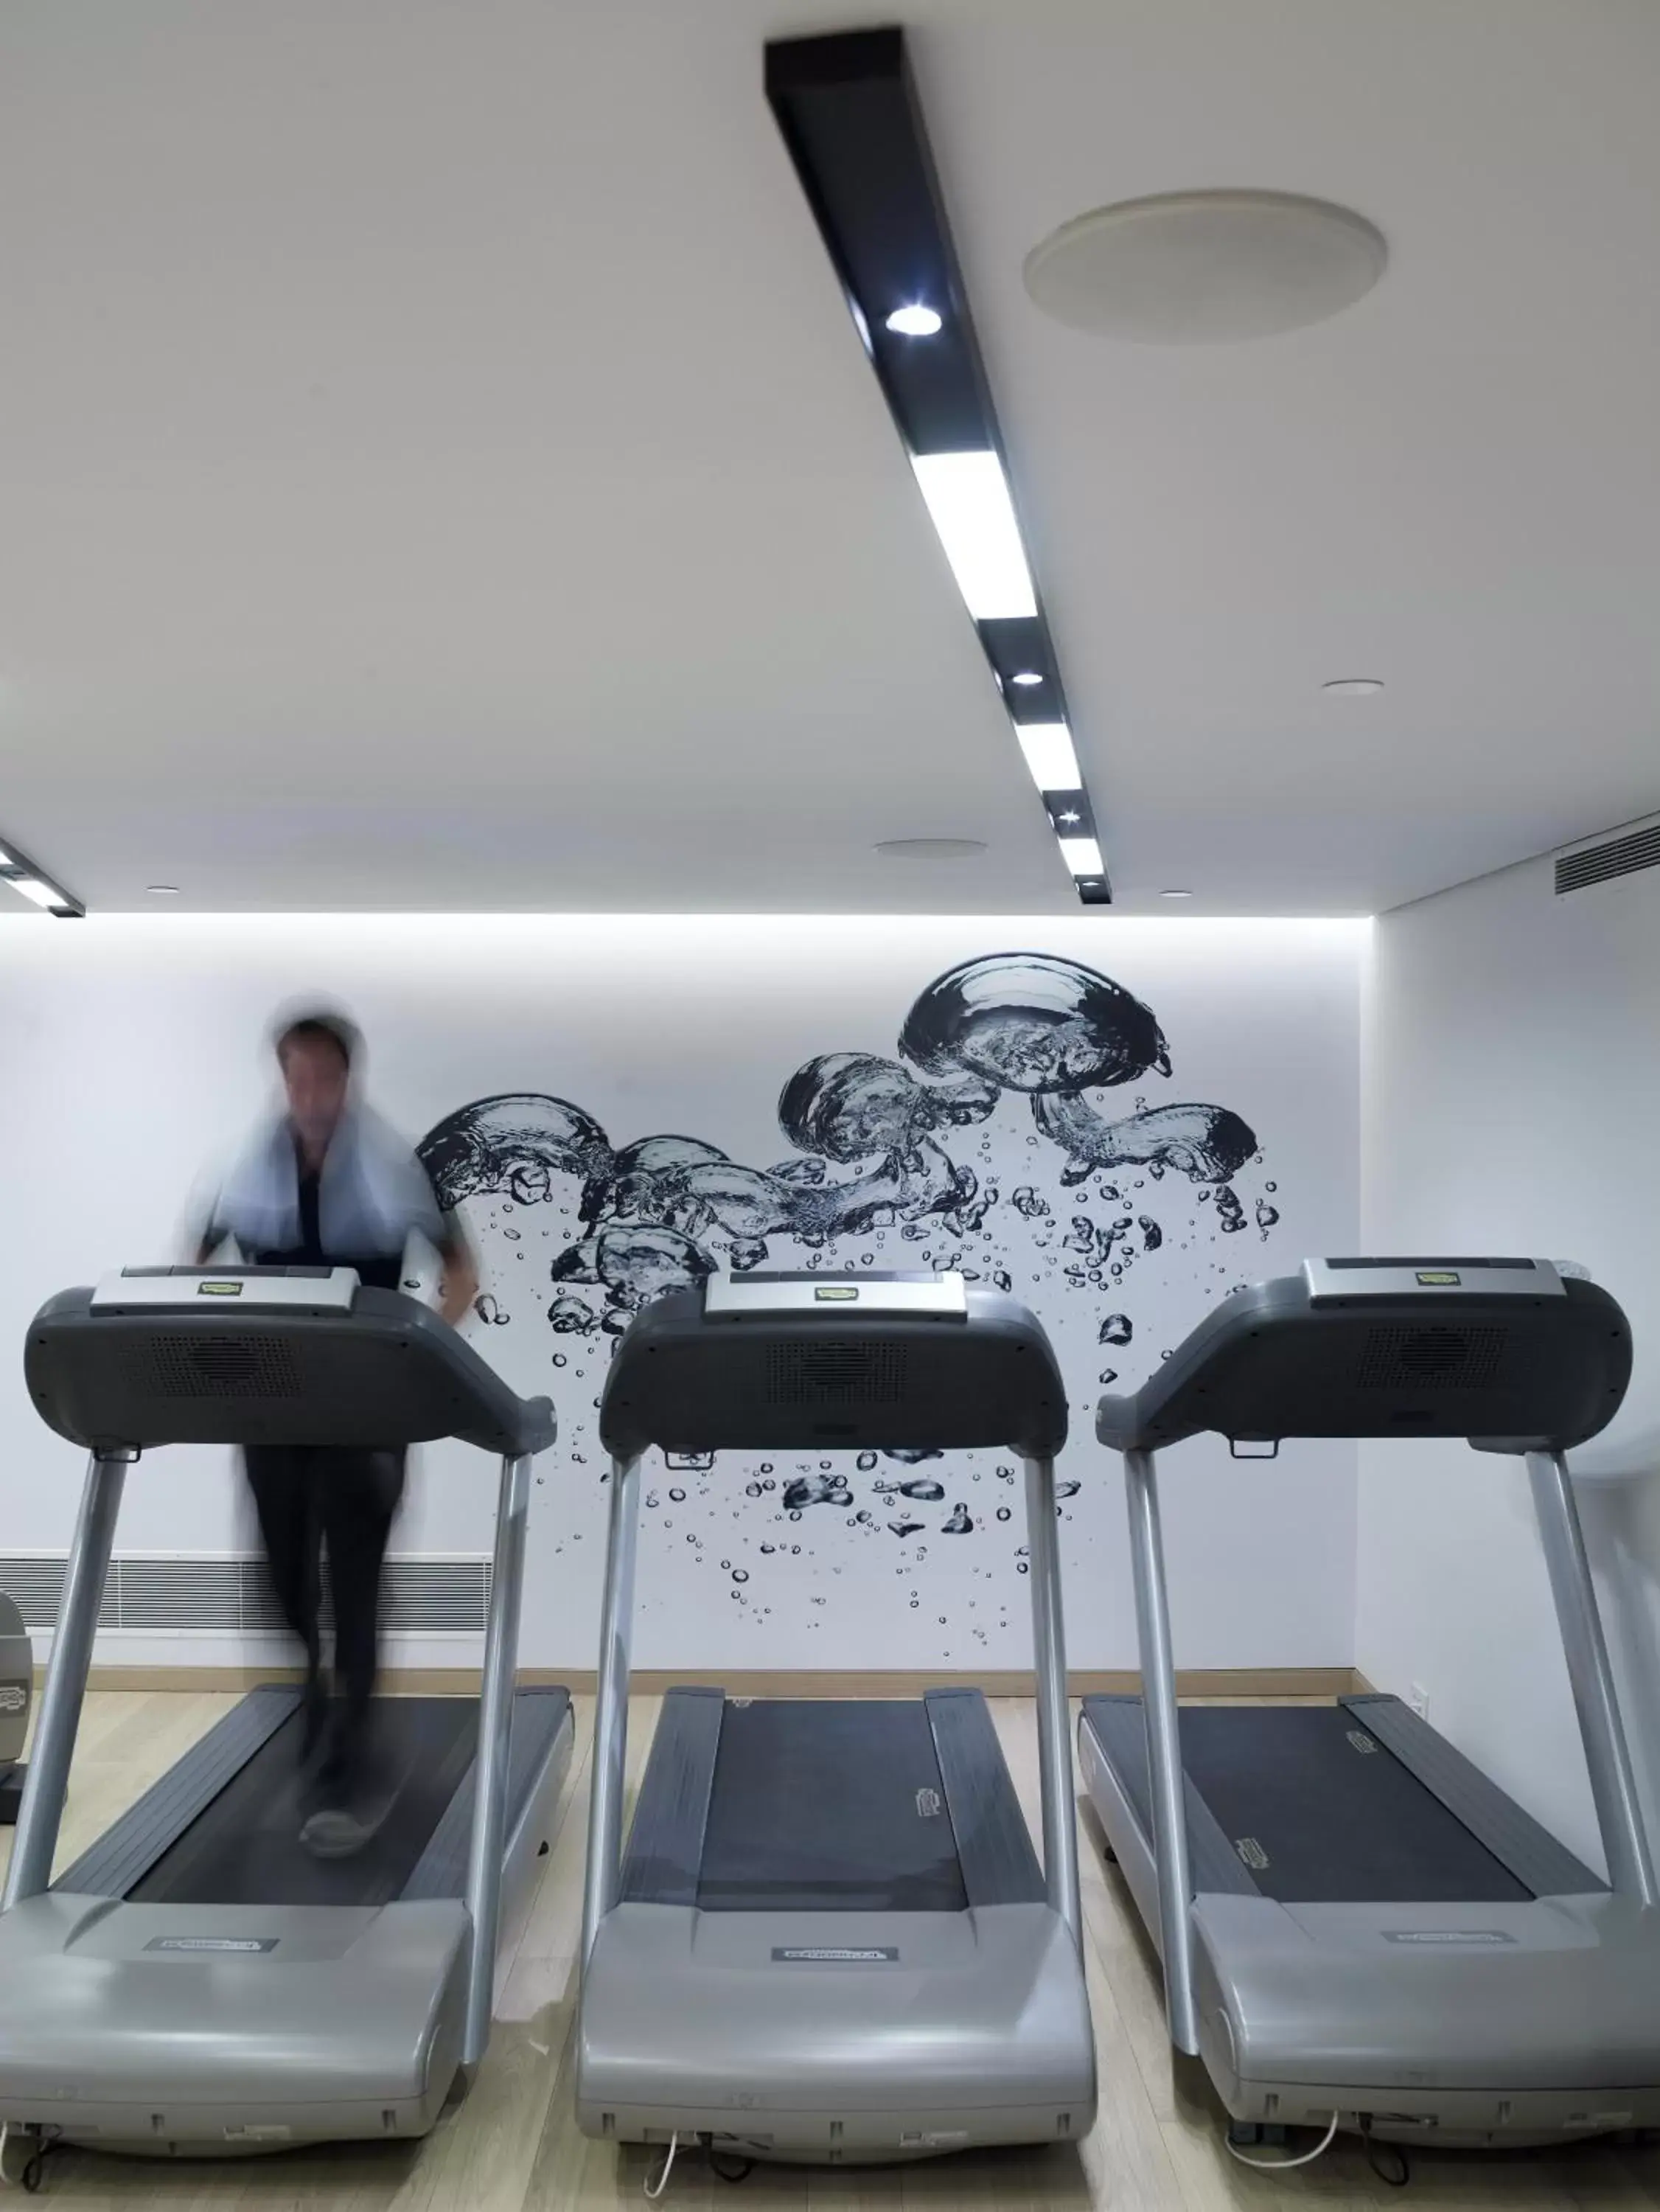 Fitness centre/facilities, Fitness Center/Facilities in The Met Hotel Thessaloniki, a Member of Design Hotels